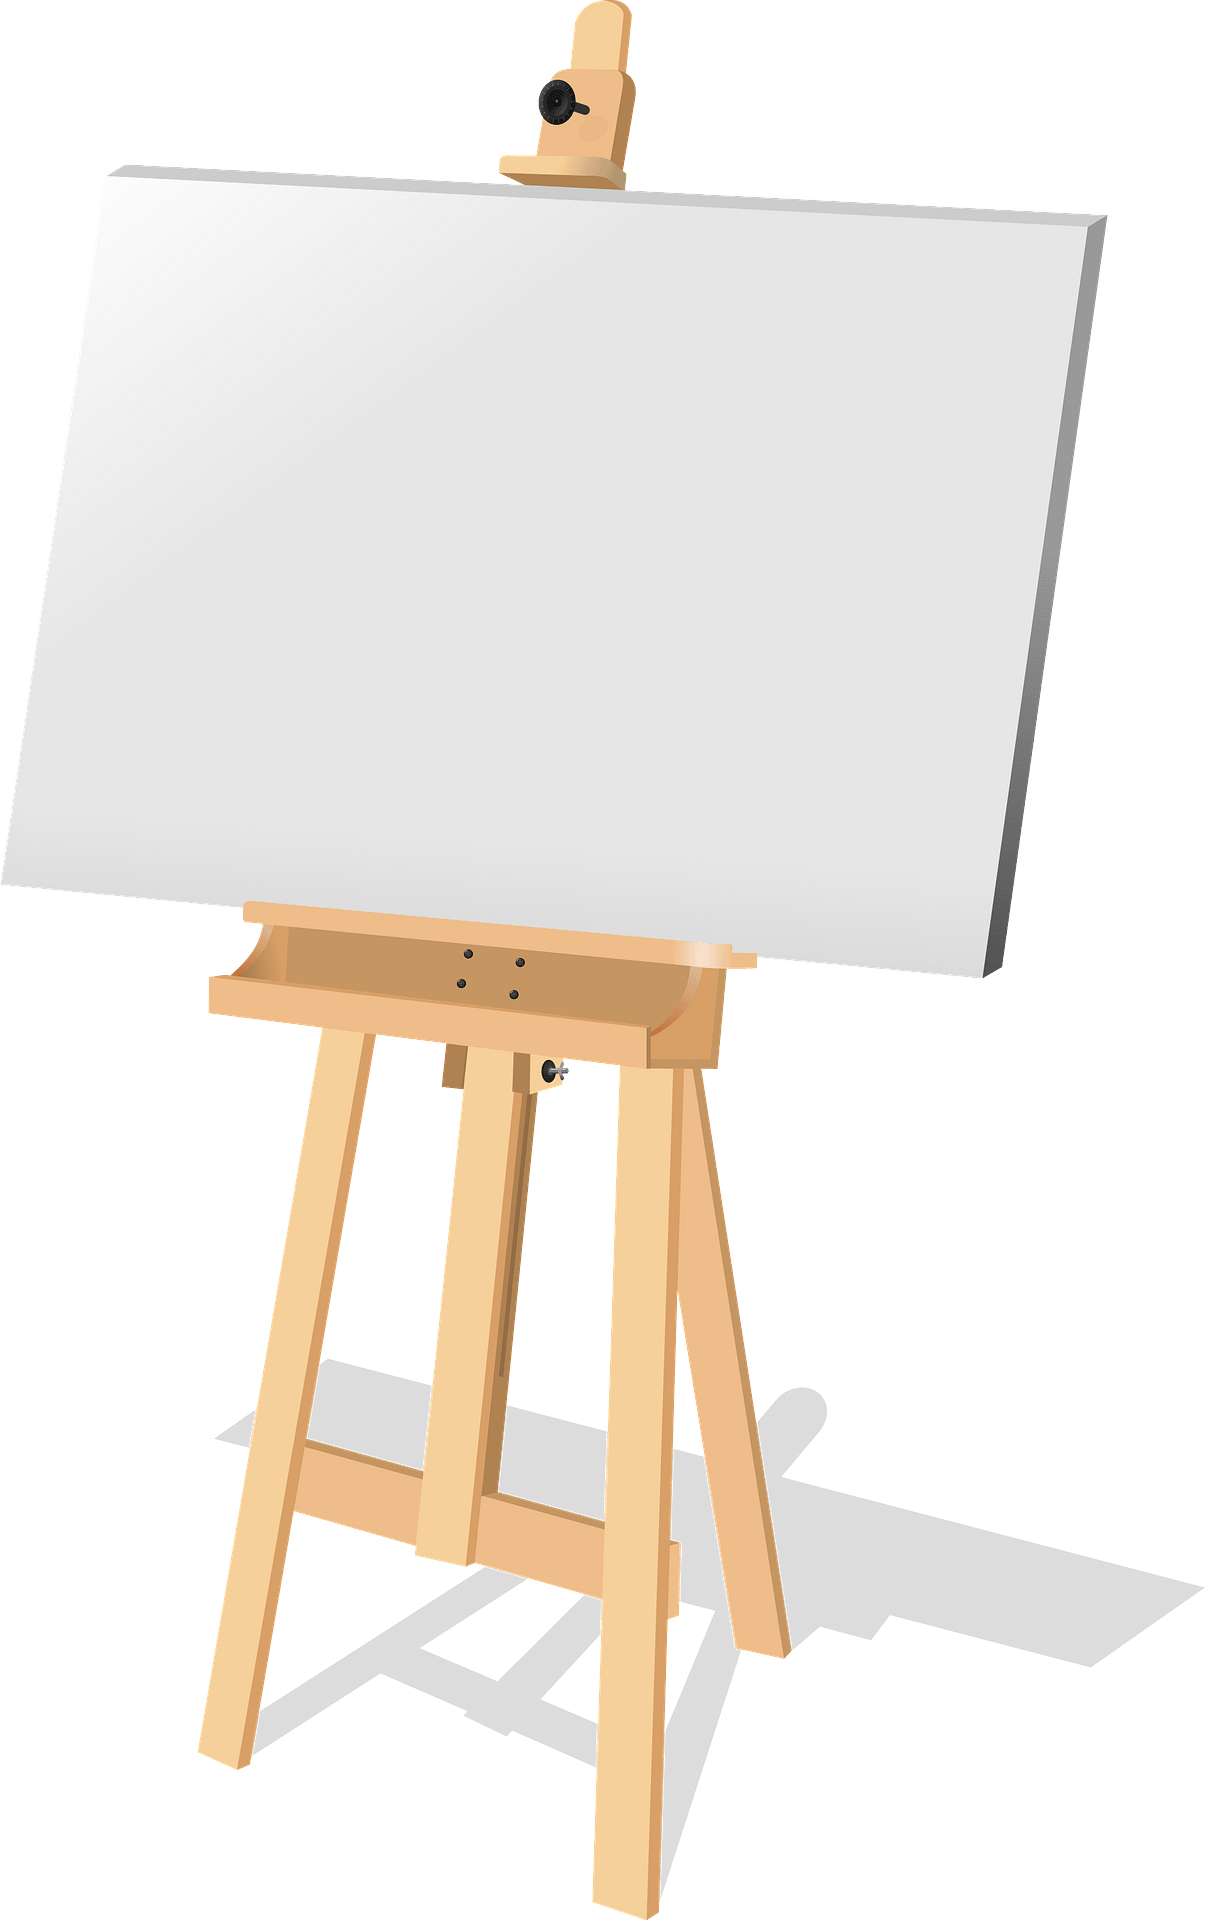 Blank Canvas on Easels - Blank Paintings / Art Templates Clip Art Set  Commercial